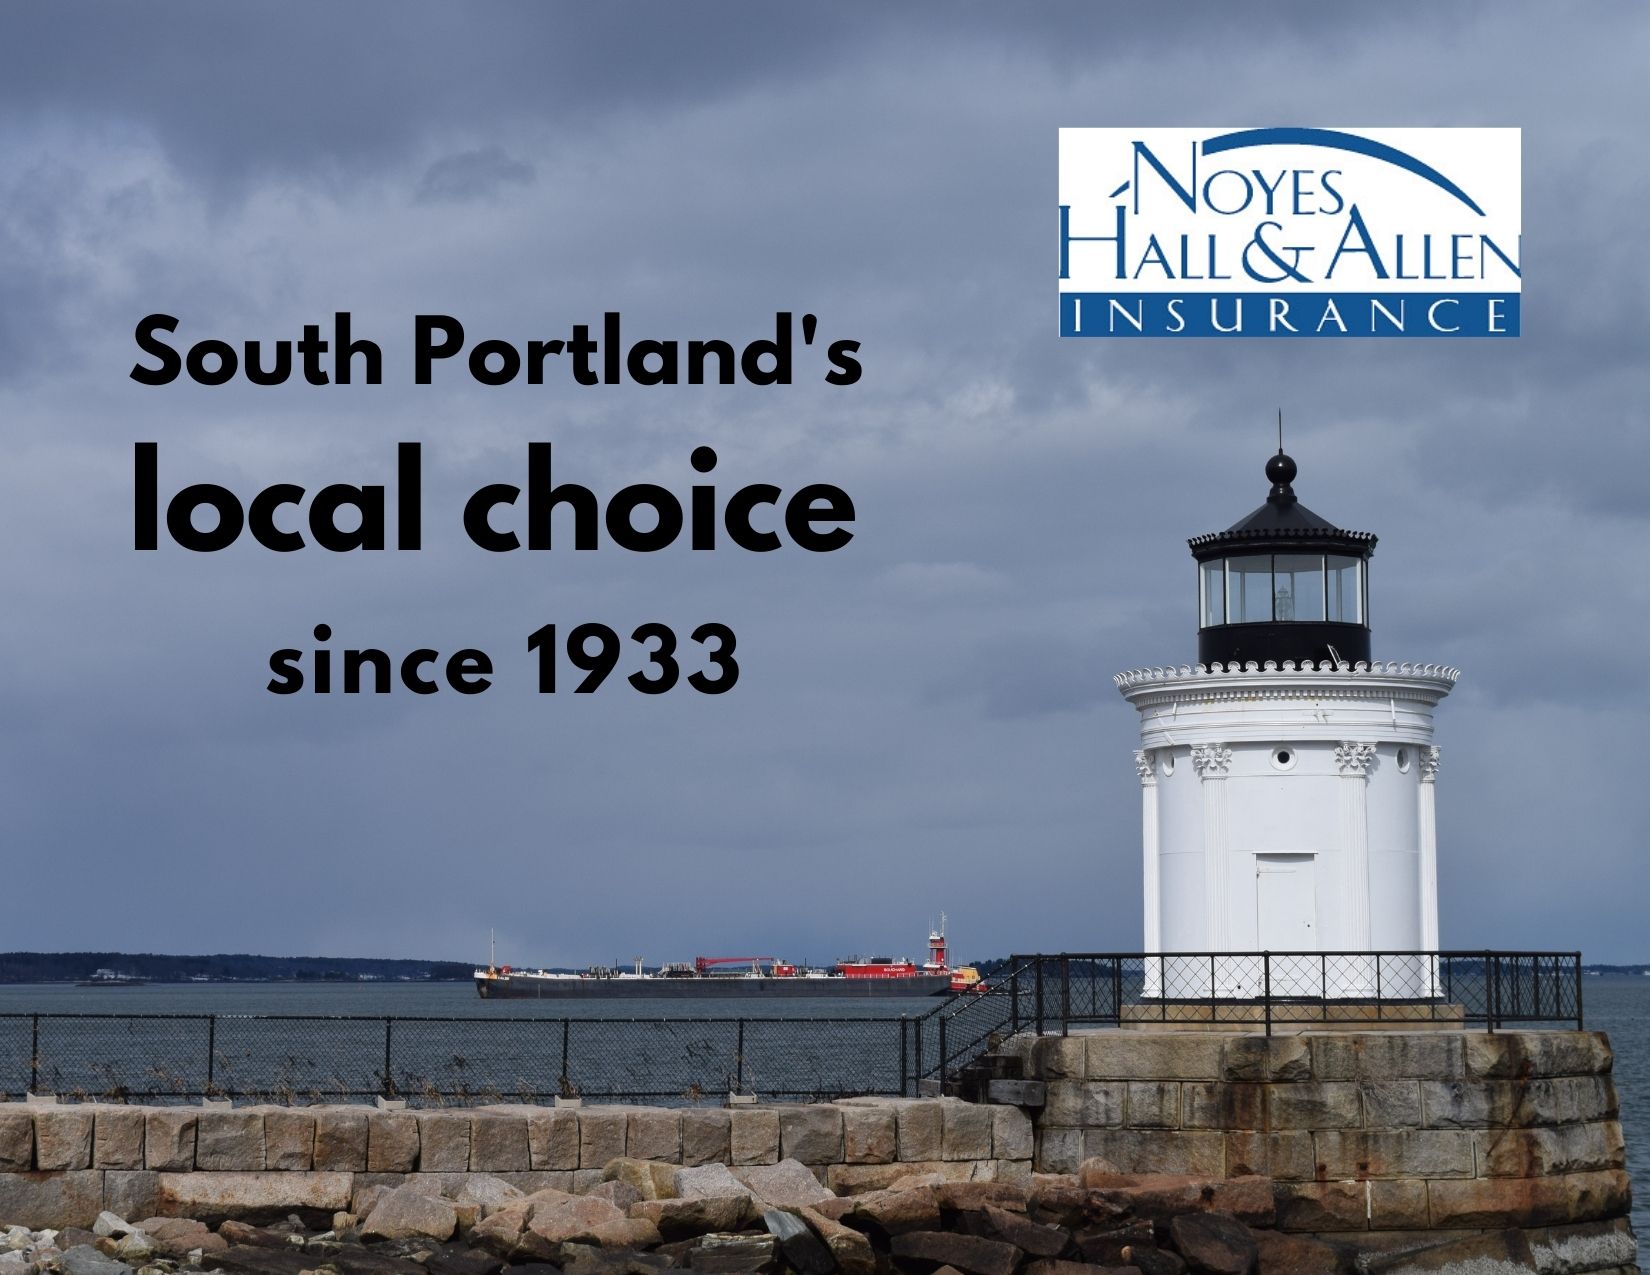 South Portland Maine home insurance since 1933 - Noyes Hall & Allen